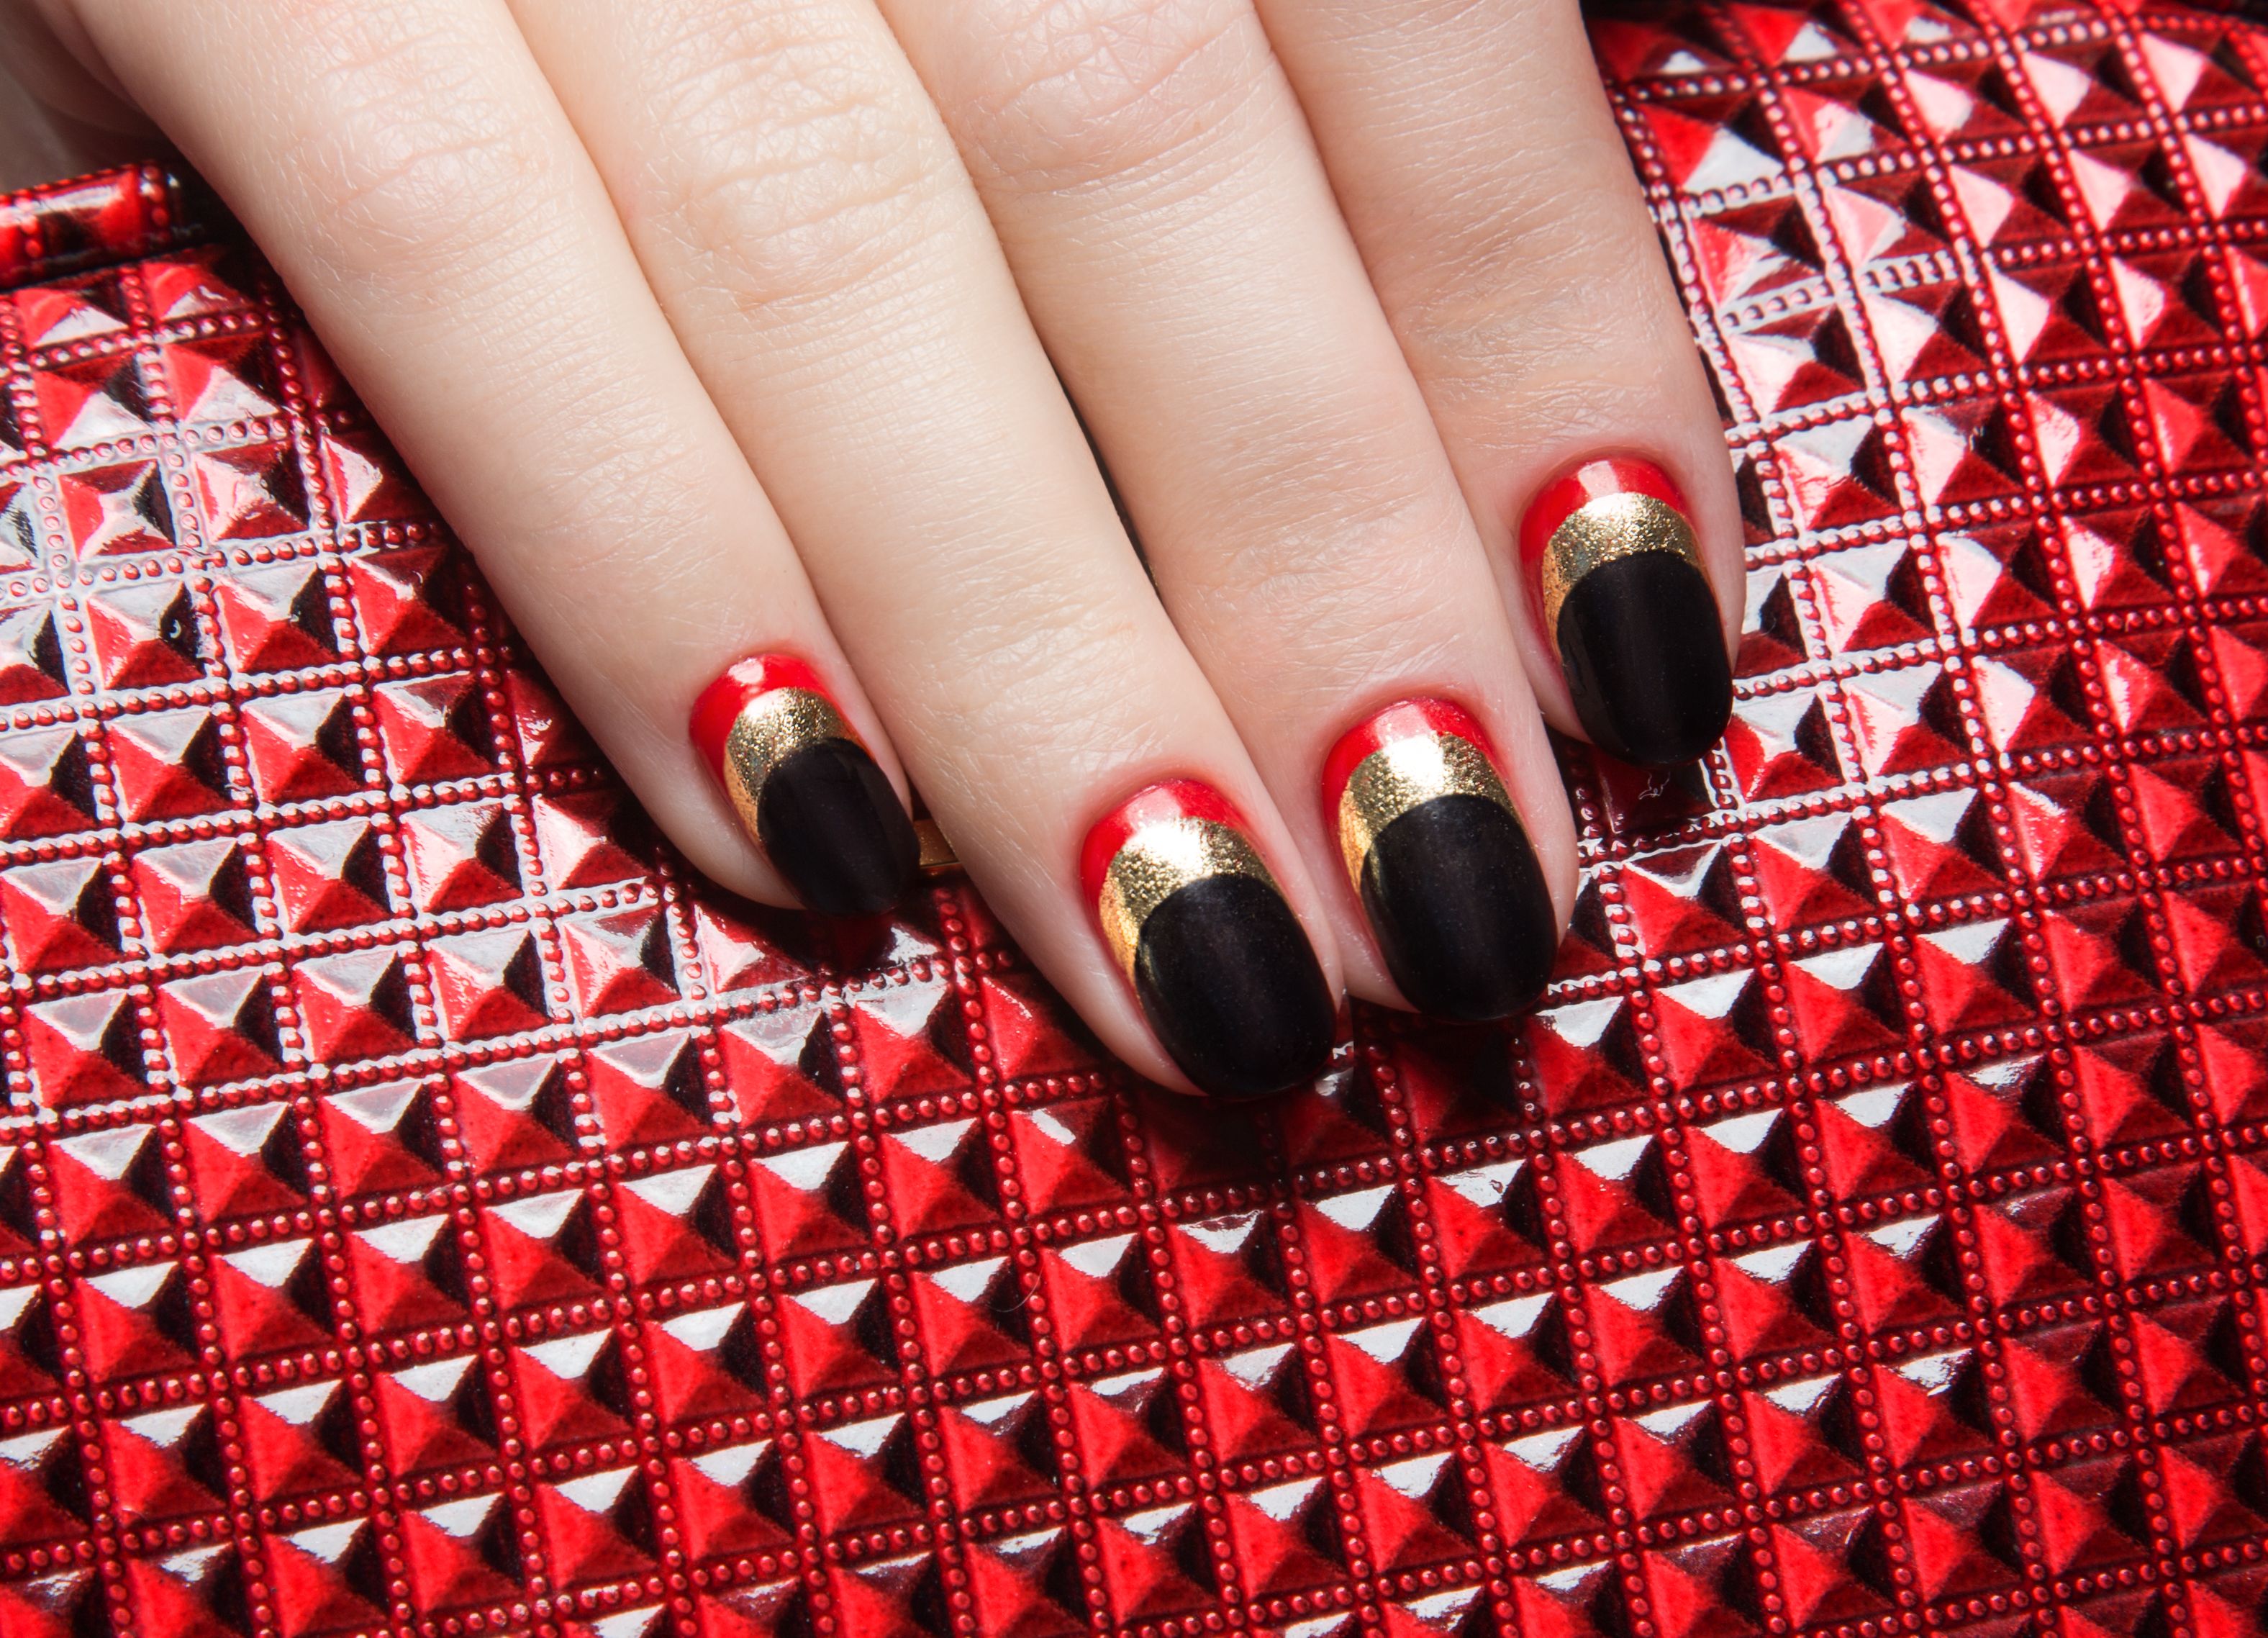 50 Black Nail Designs That Are Classy and Chic